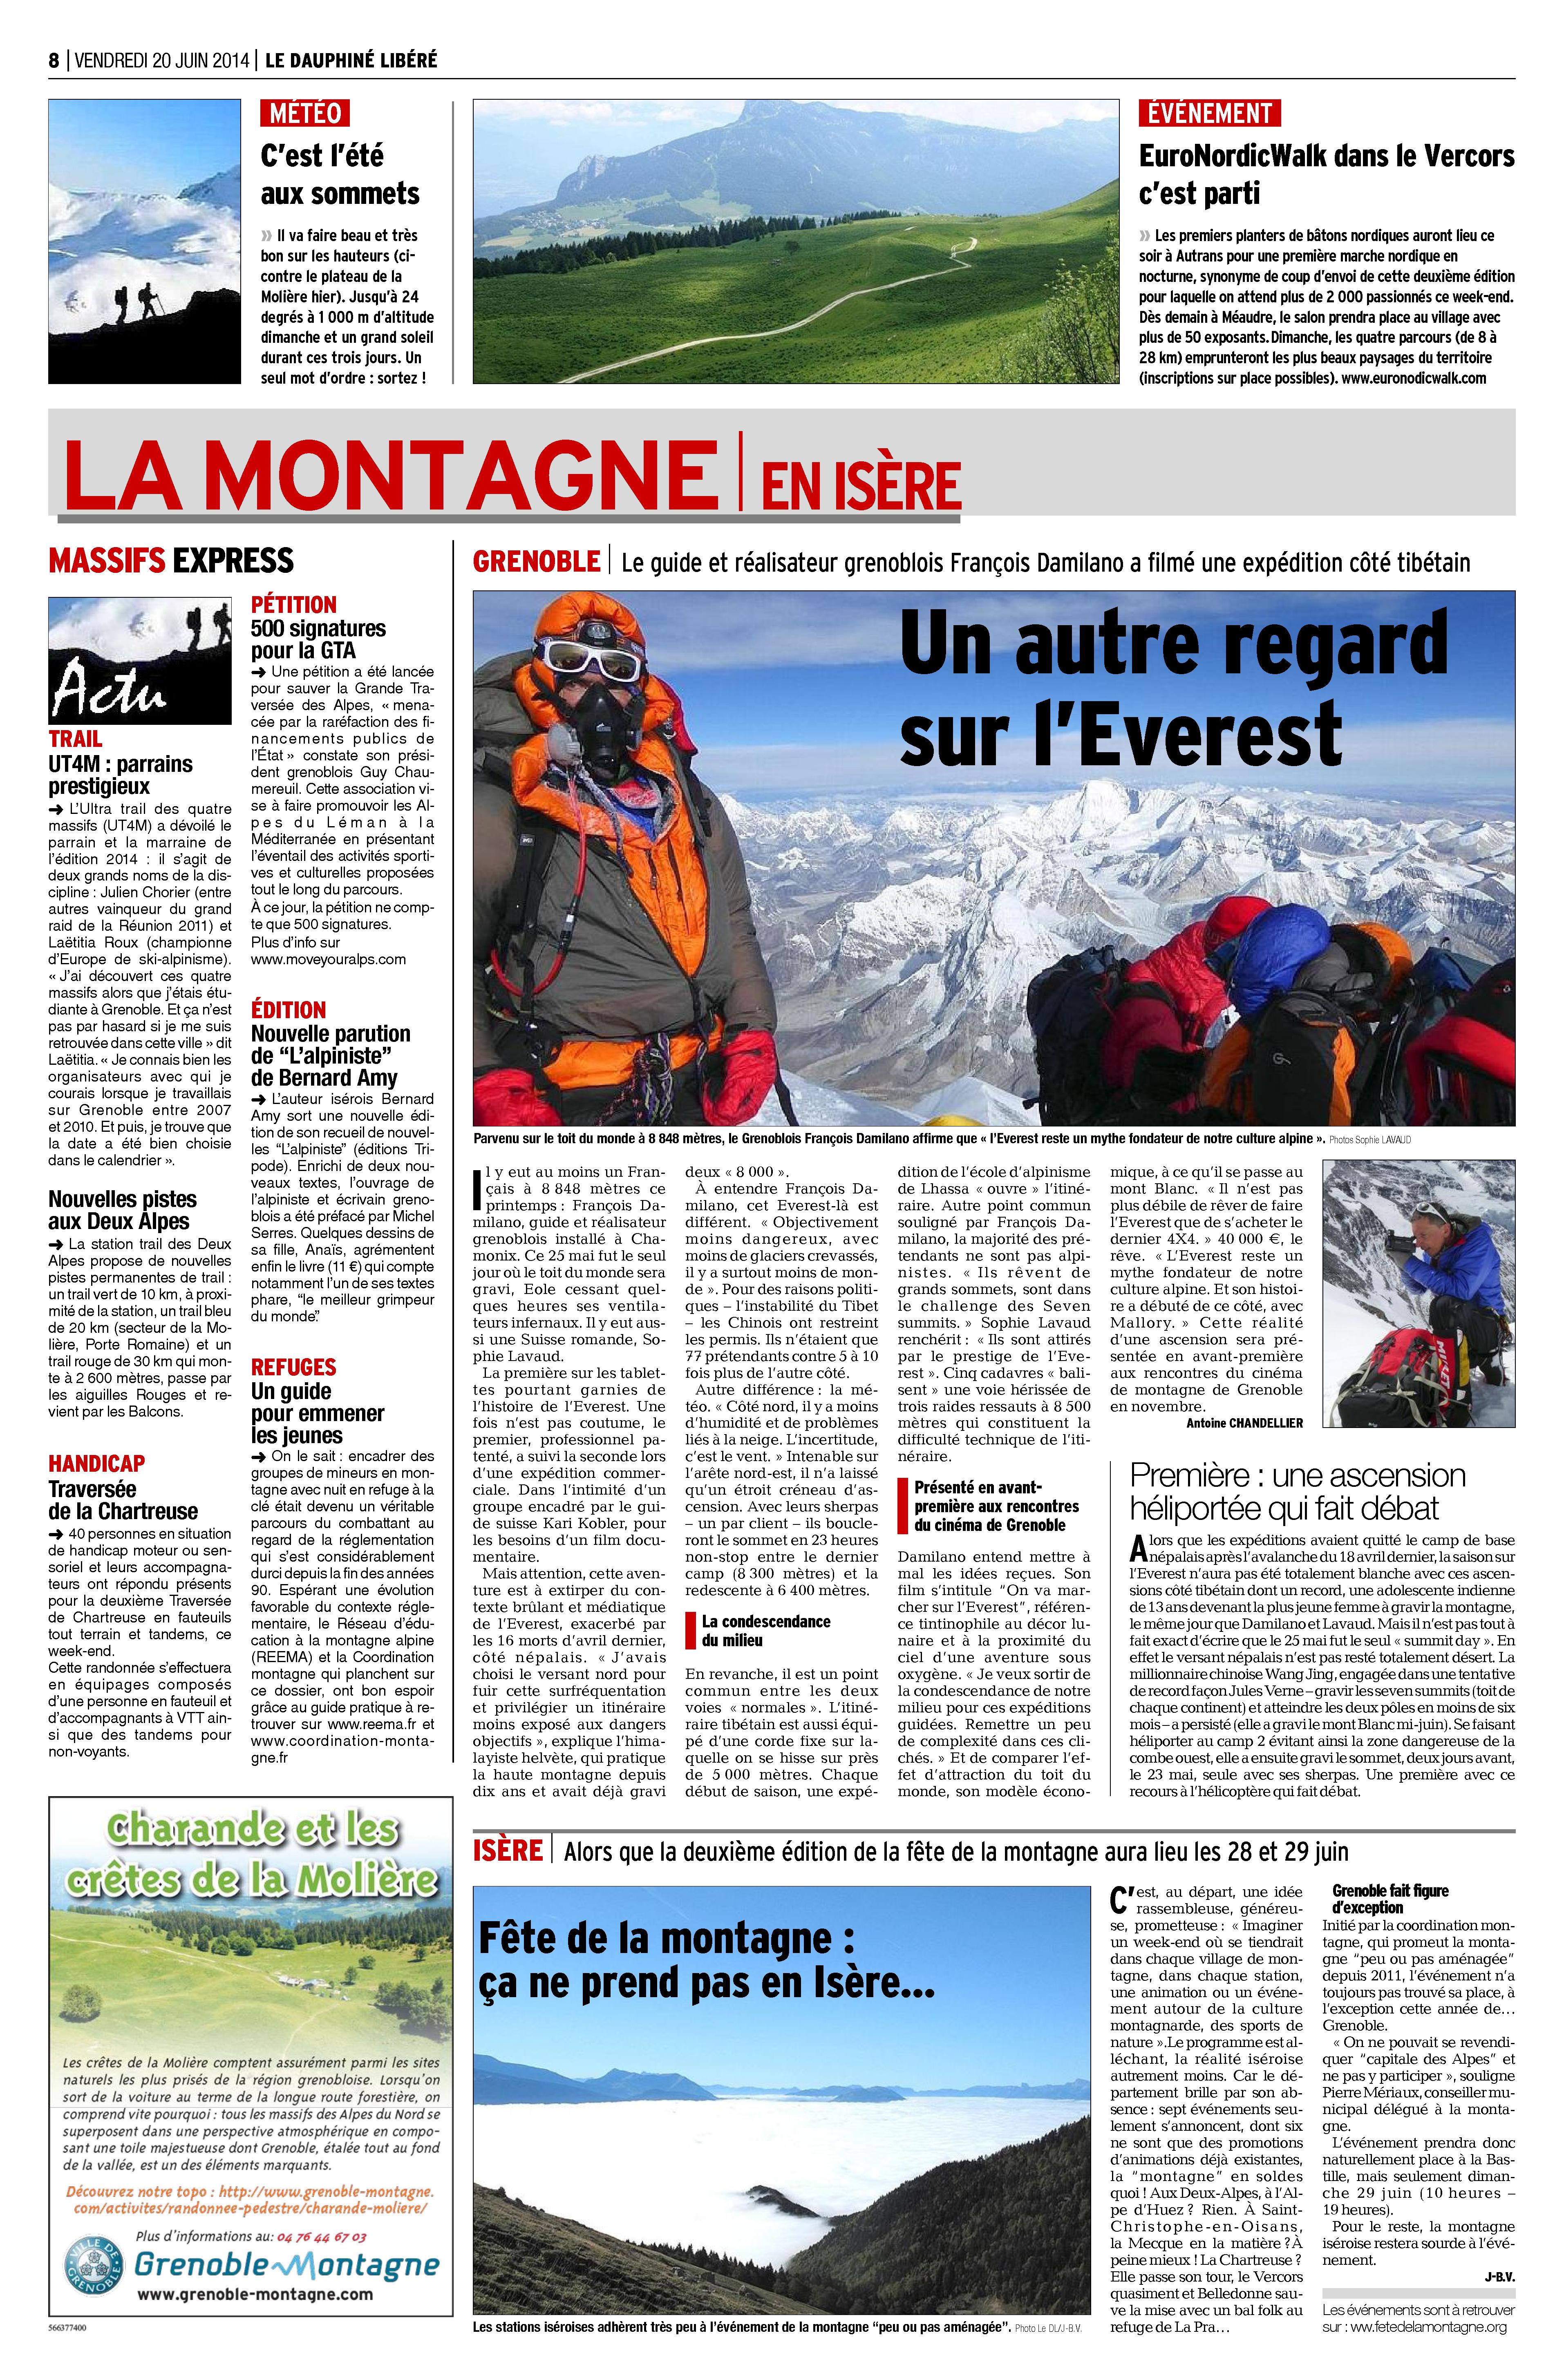 2014_06_20 DauphineLibere-Page_8-edition-de-grenoble-page1